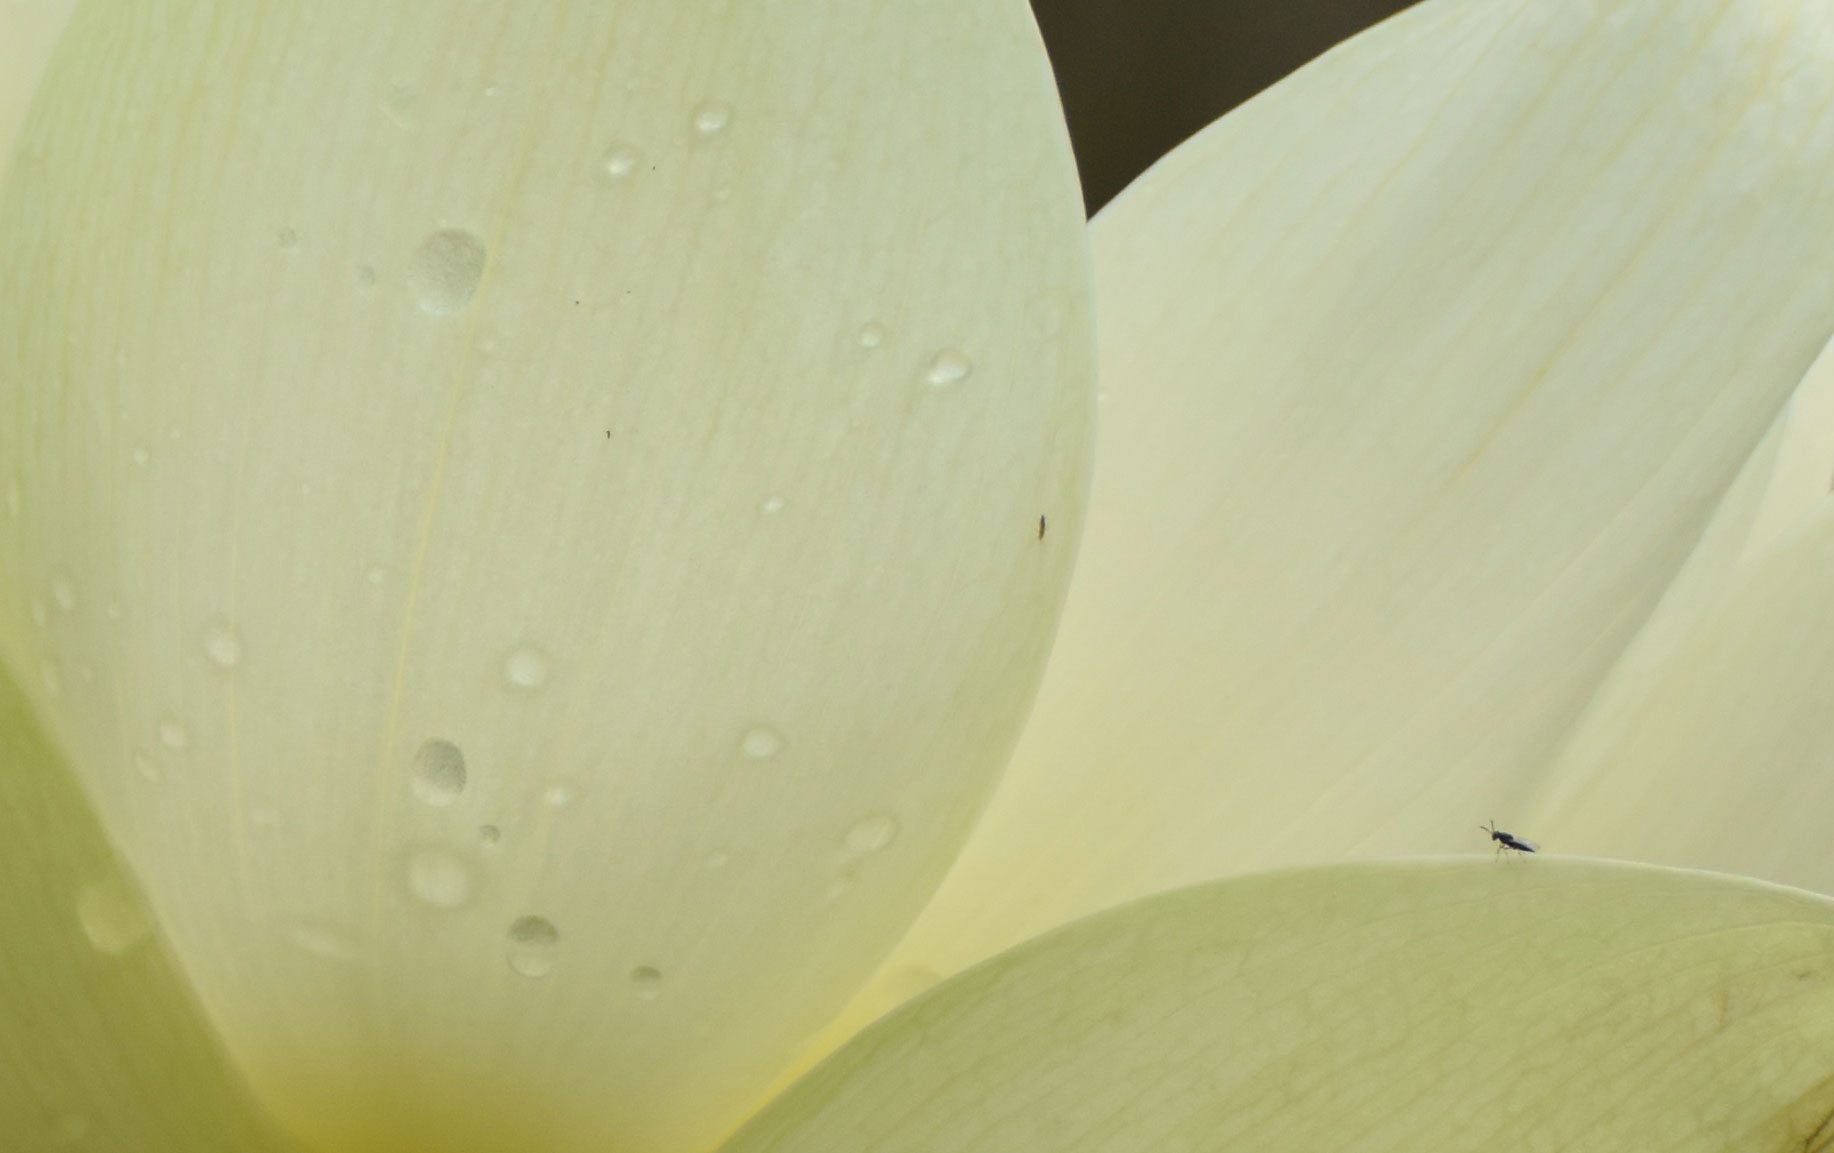 Image of tiny black bug on the cream petals of an open lotus blossom - photo taken by Sharon Ngo, Instructor, Fujian White Crane Kung Fu & Tai Chi Martial Arts